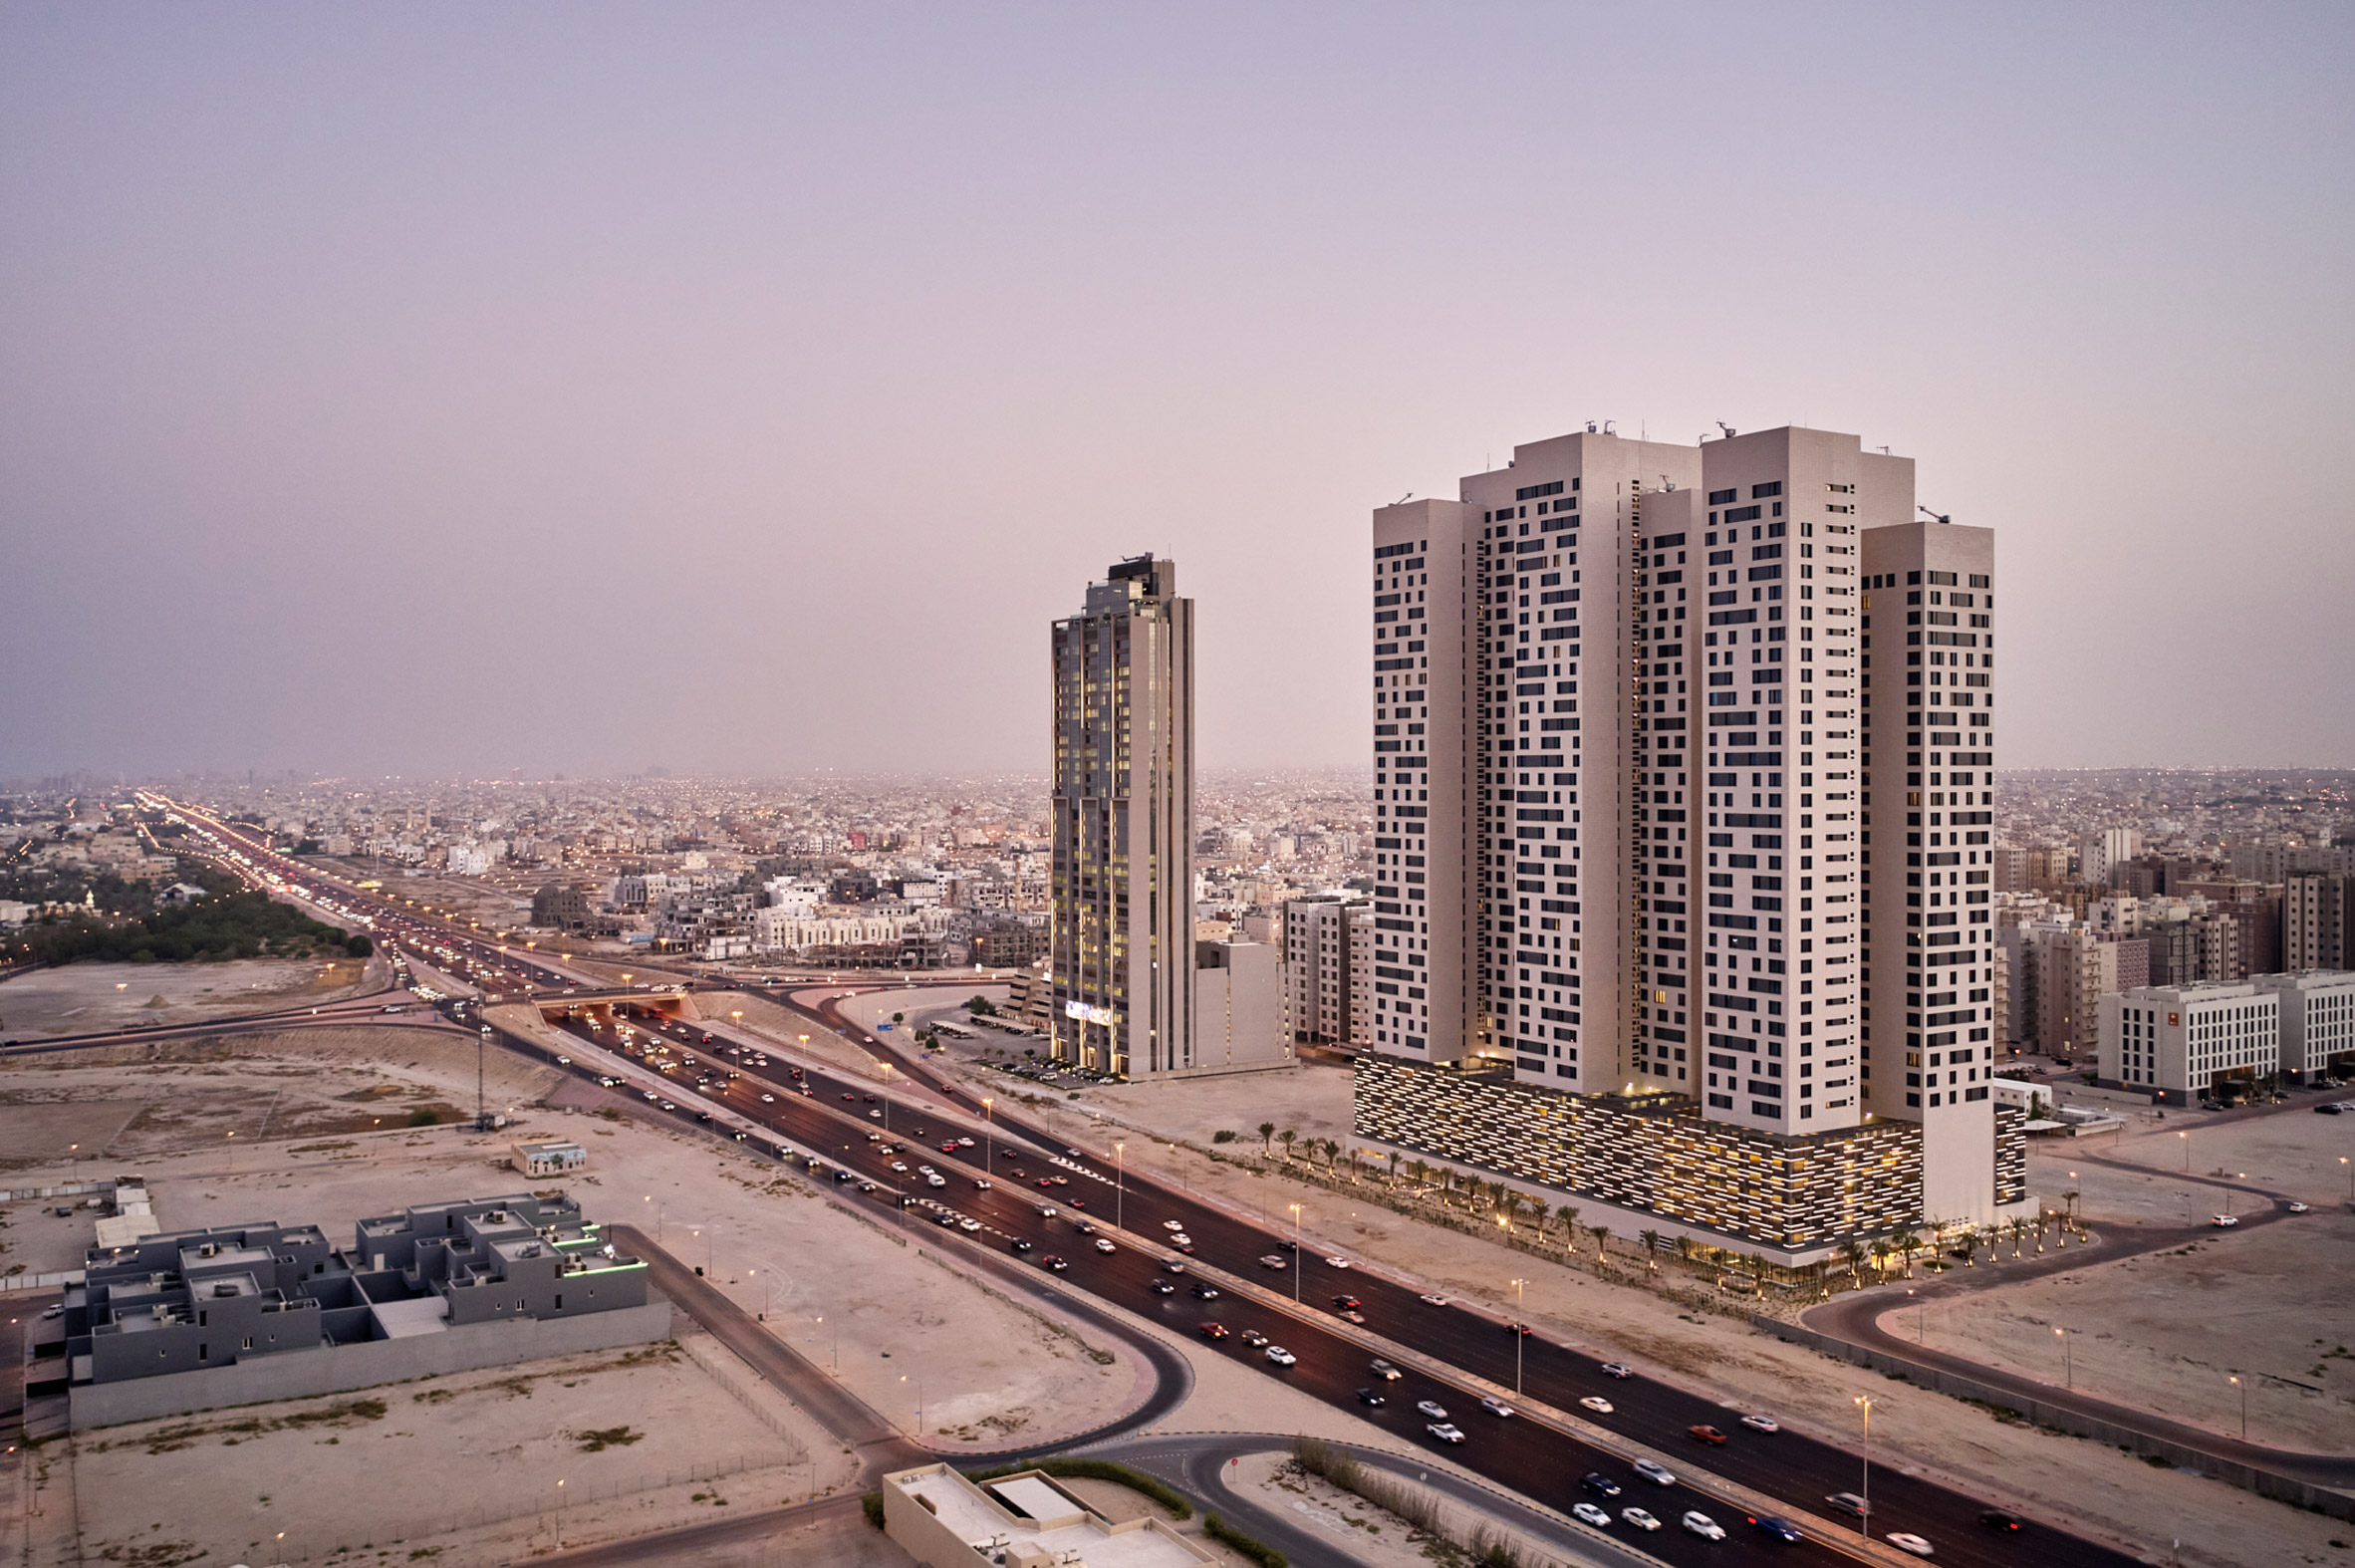 Image of the towers of Tamdeen Square along the horizon of Kuwait